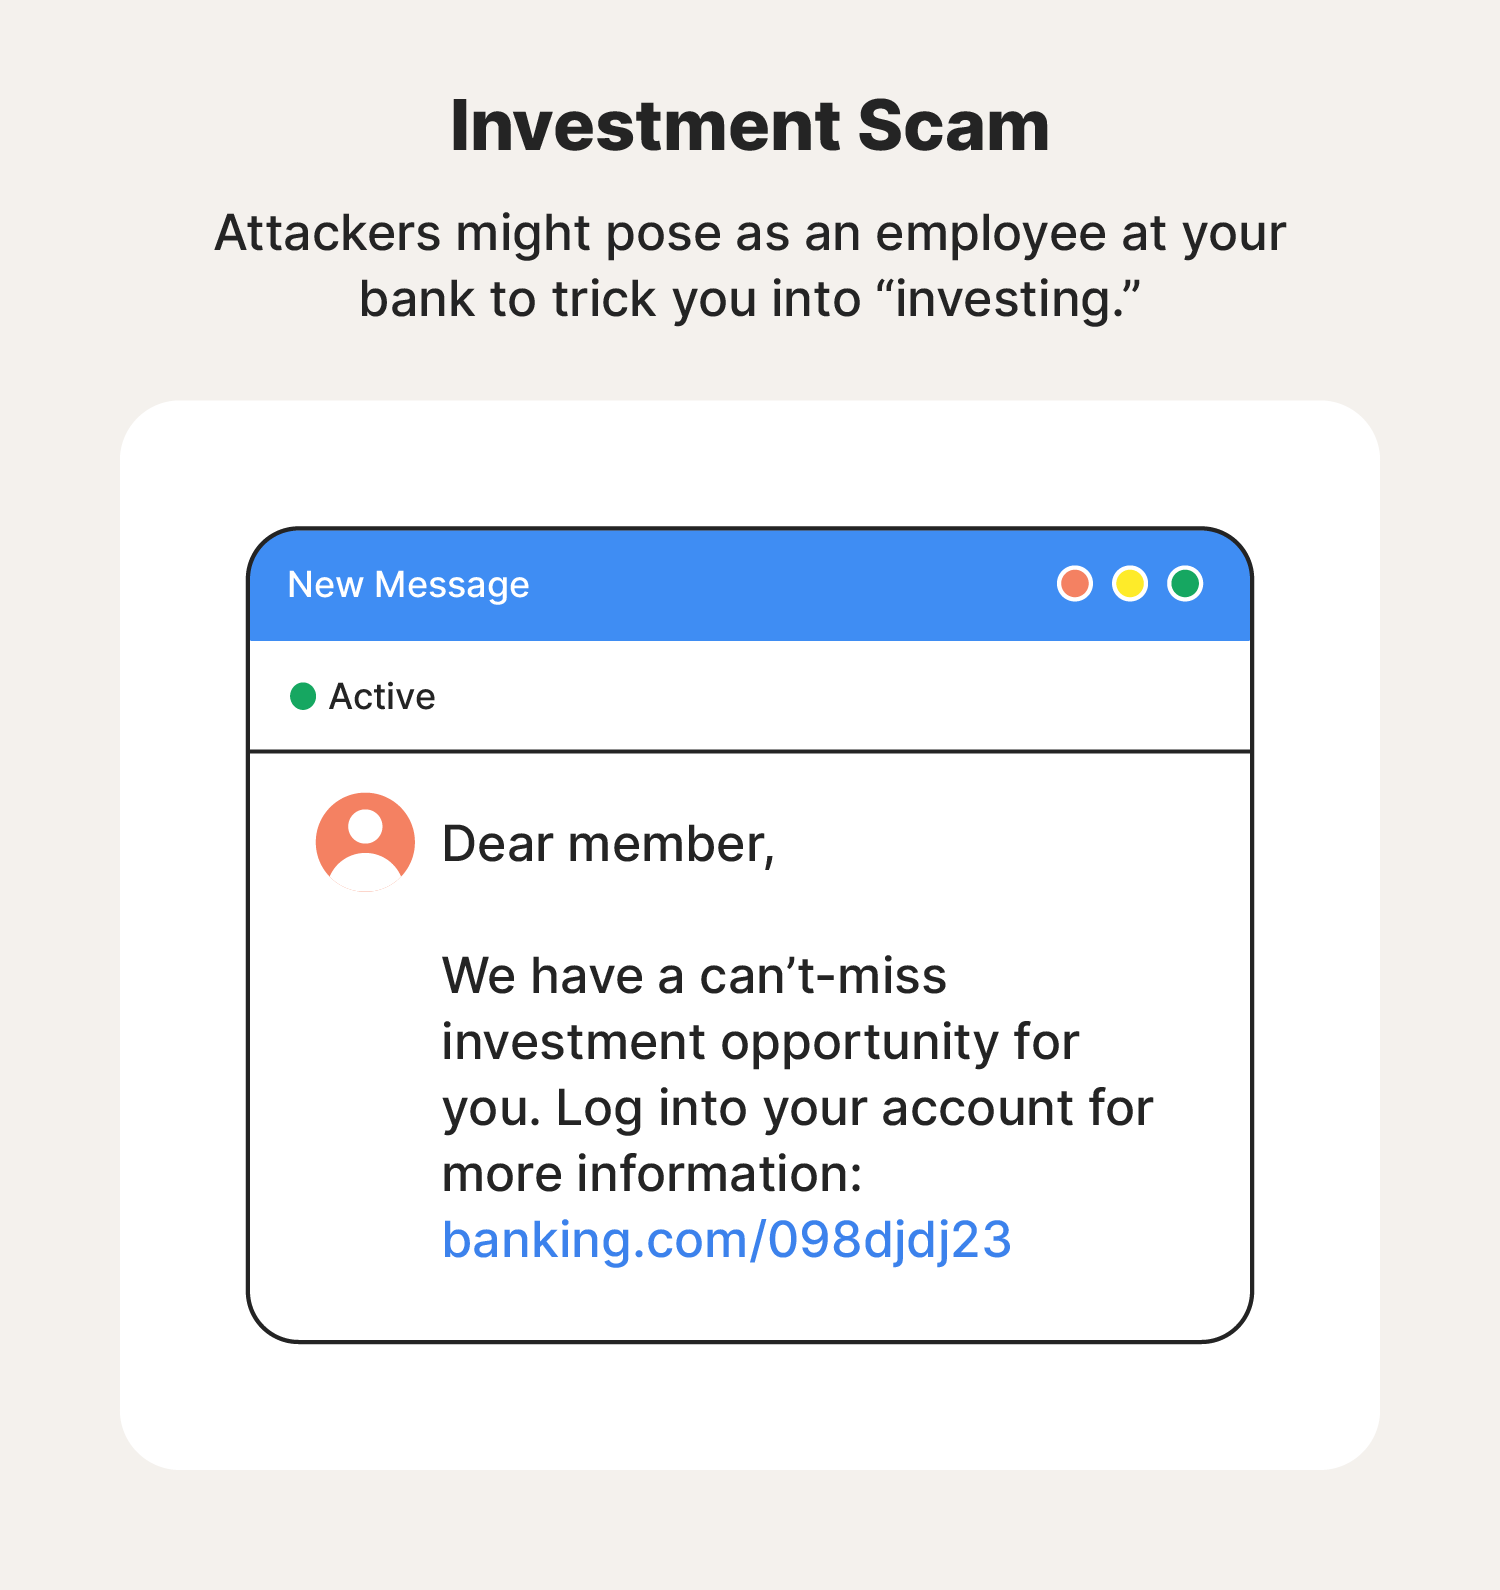 An example of an investment scam message.